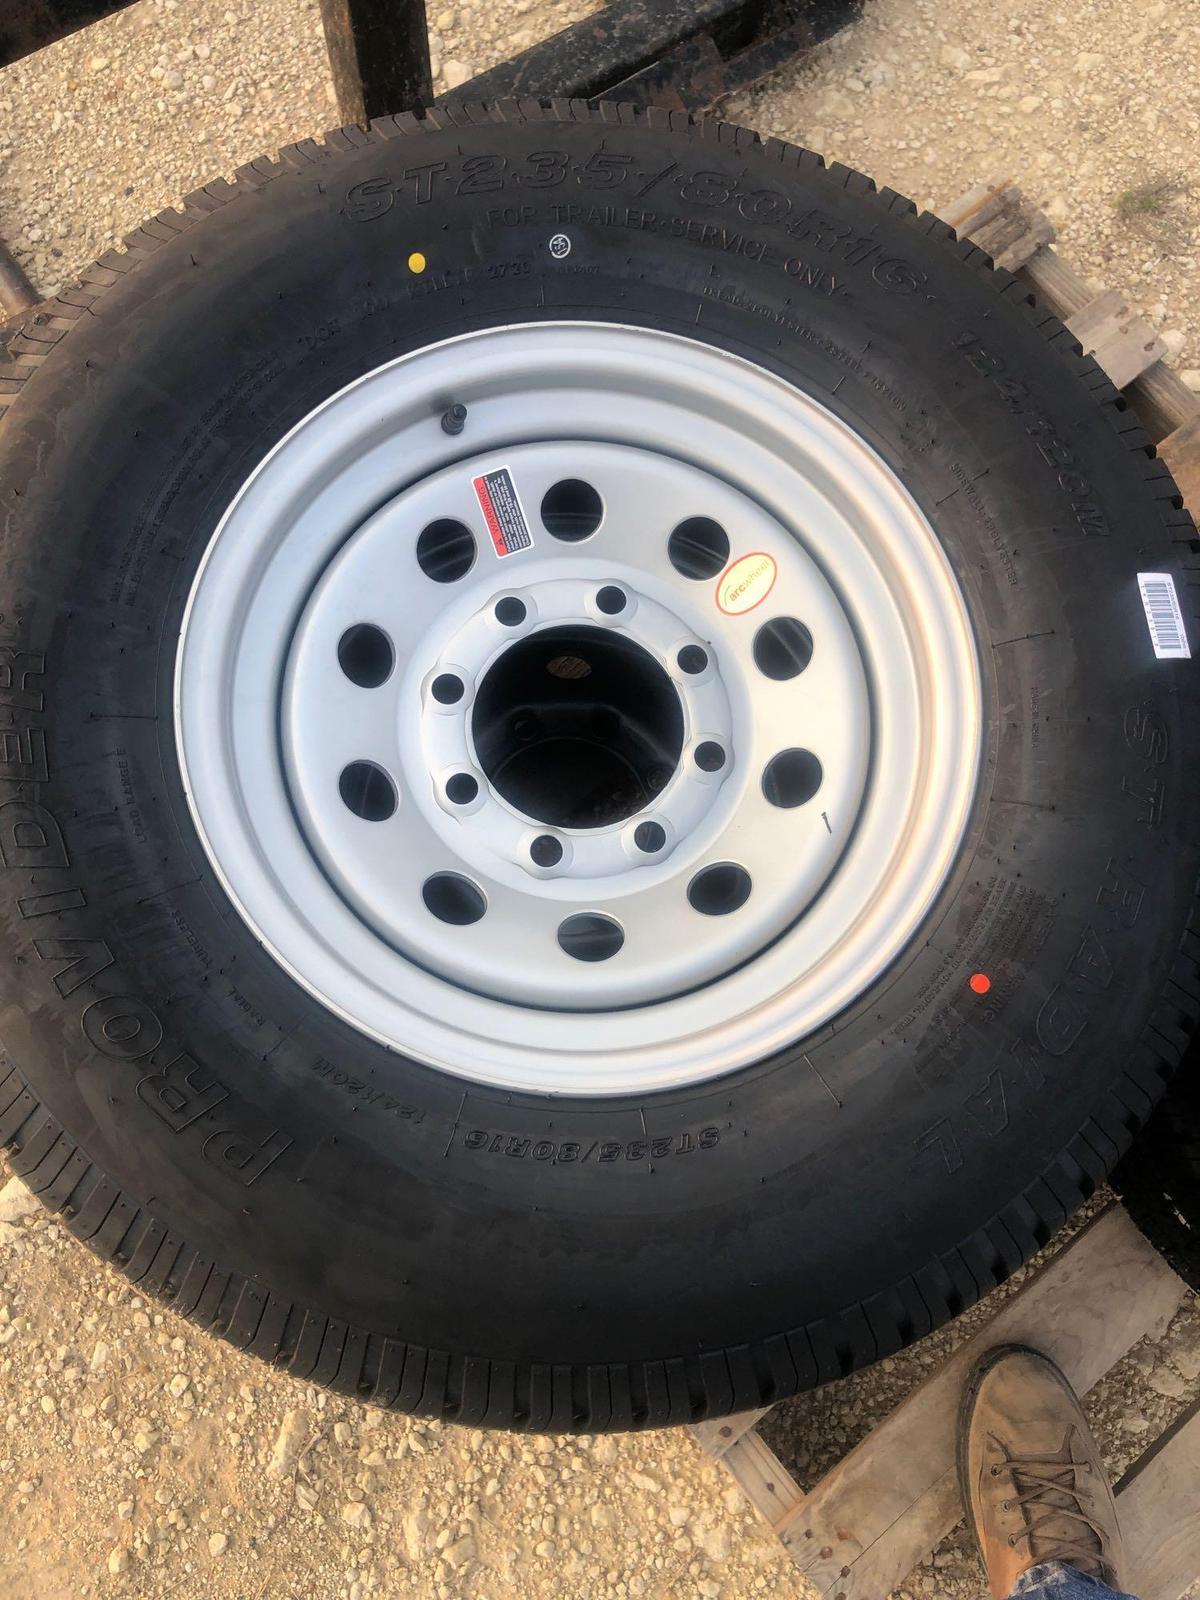 New ST 235 80 R16 Trailer Tires on 8 lug wheels Sell two times the money, must take both